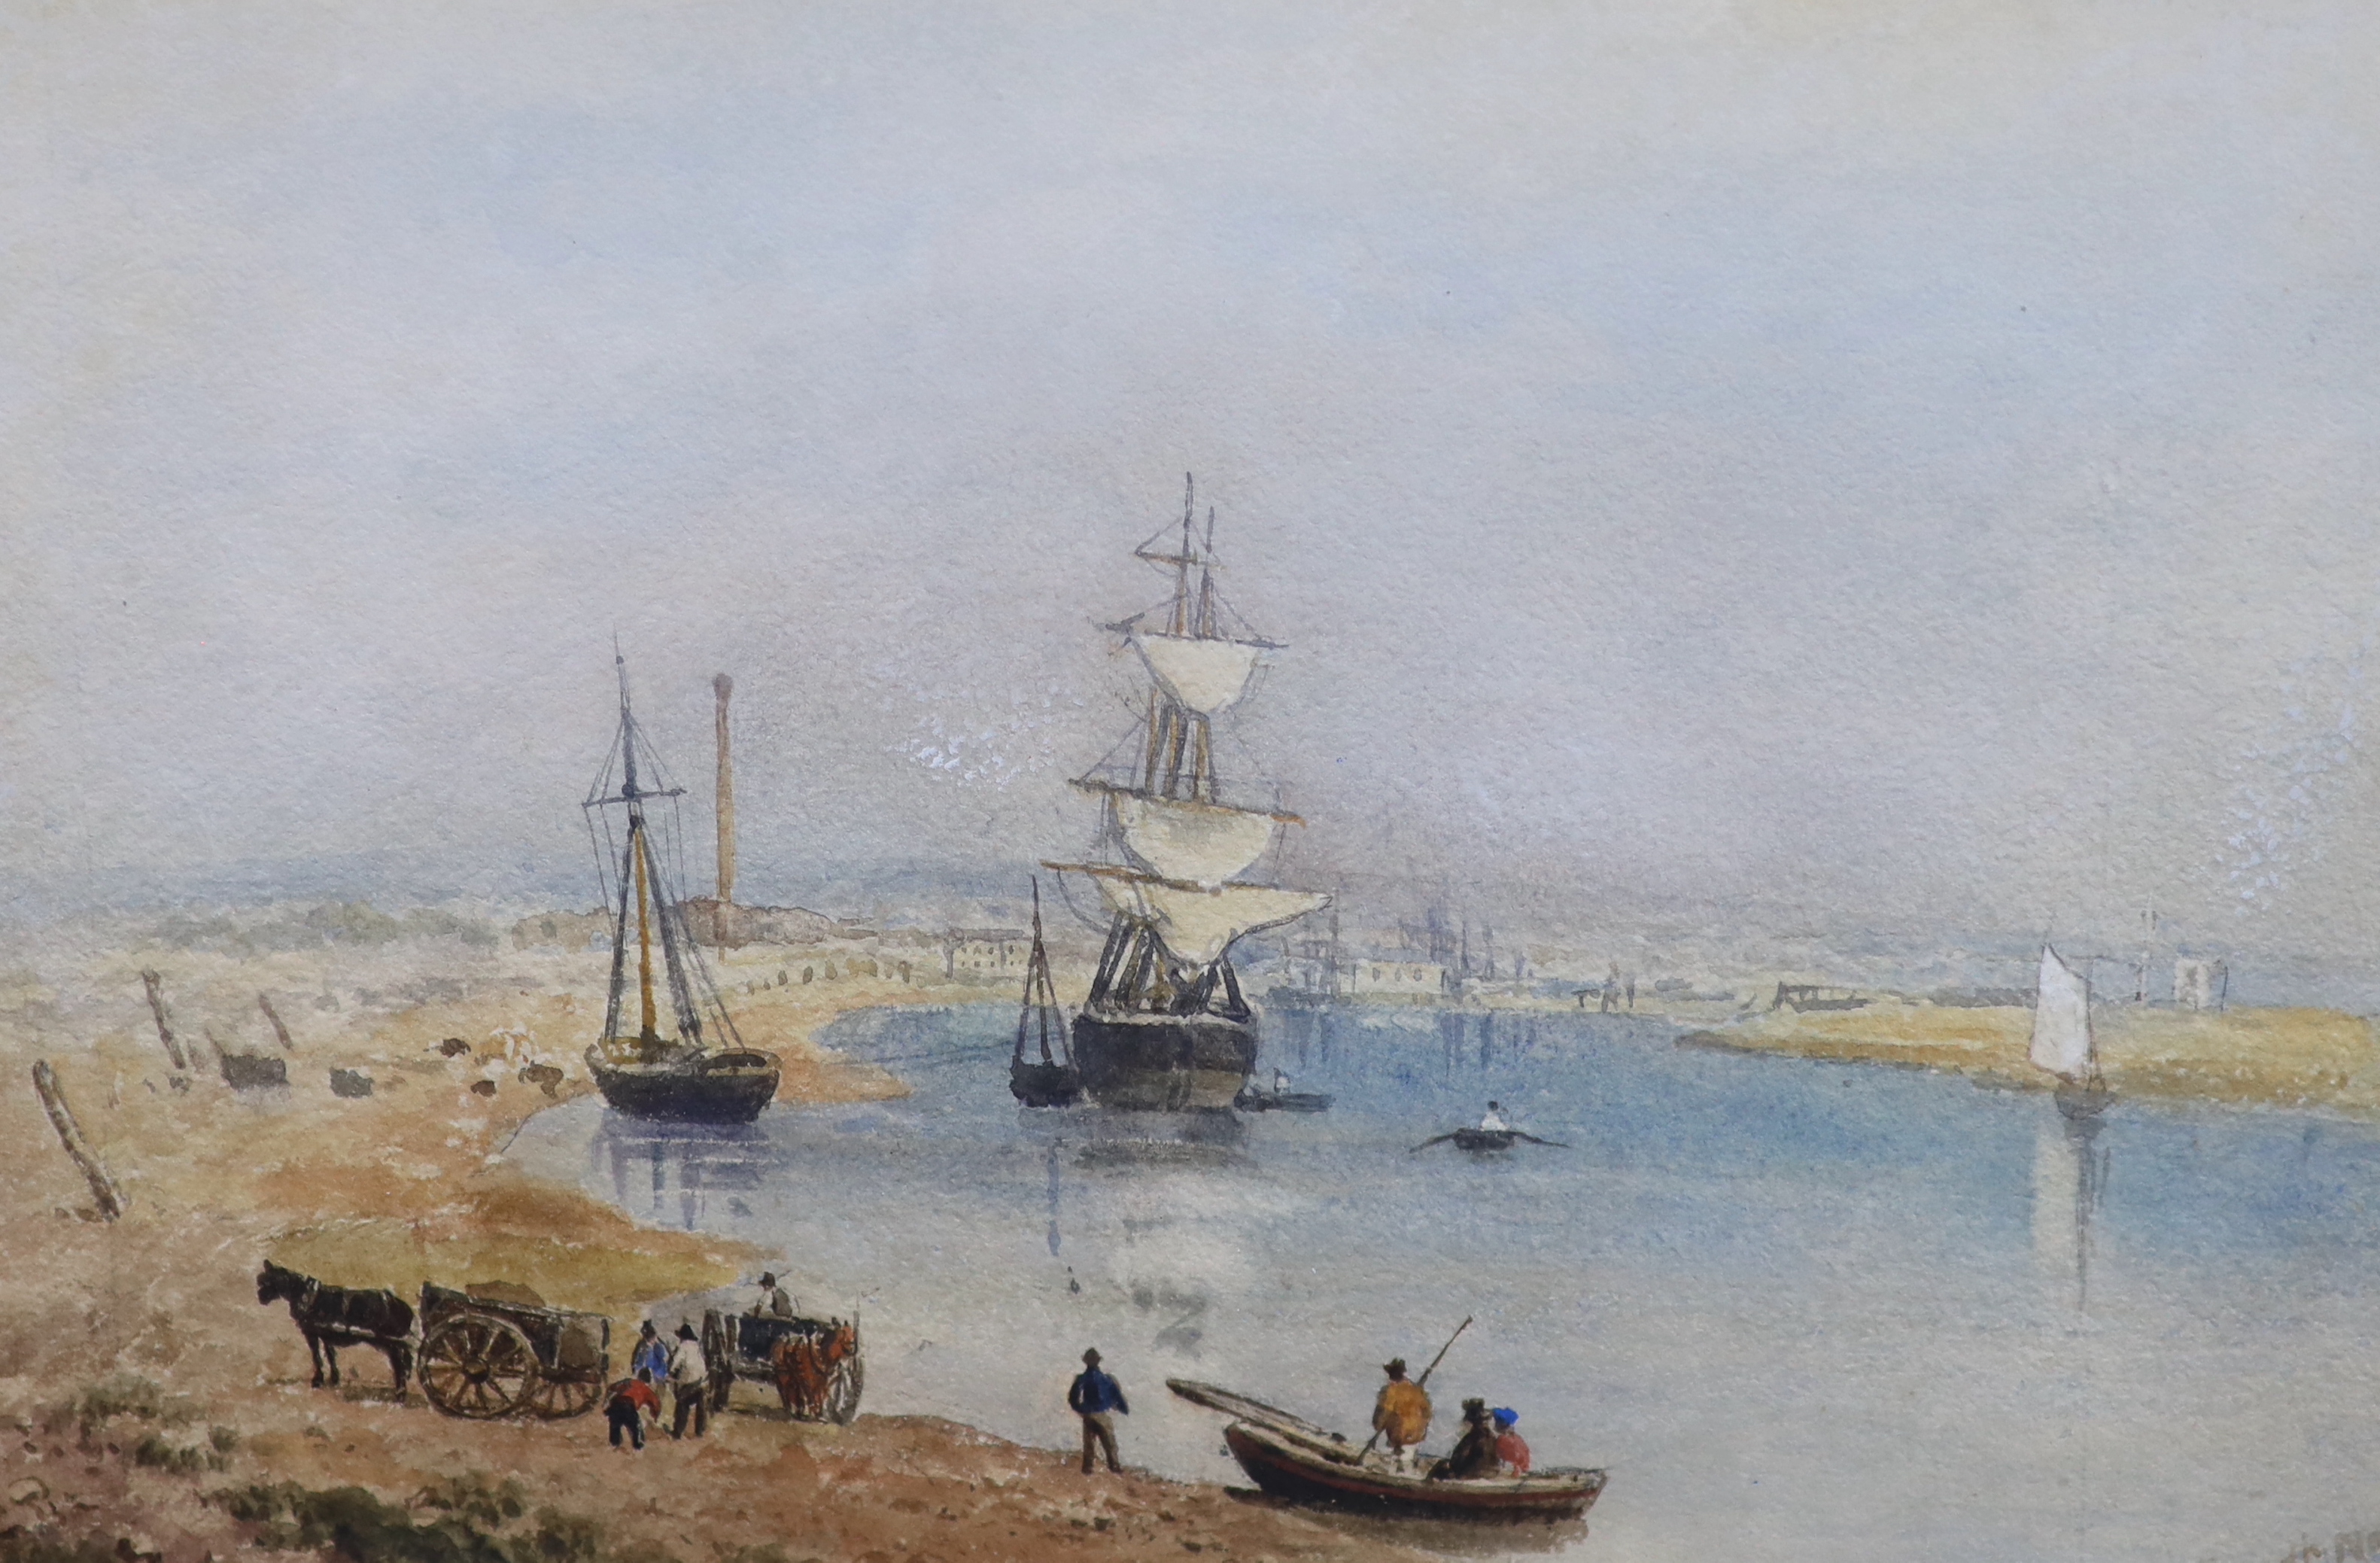 Frederick Nash (British, 1782-1856), 'Kingston Pier, Sussex' and 'Between Kingston and Shoreham, Sussex', pair of watercolours, 21.5 x 31cm